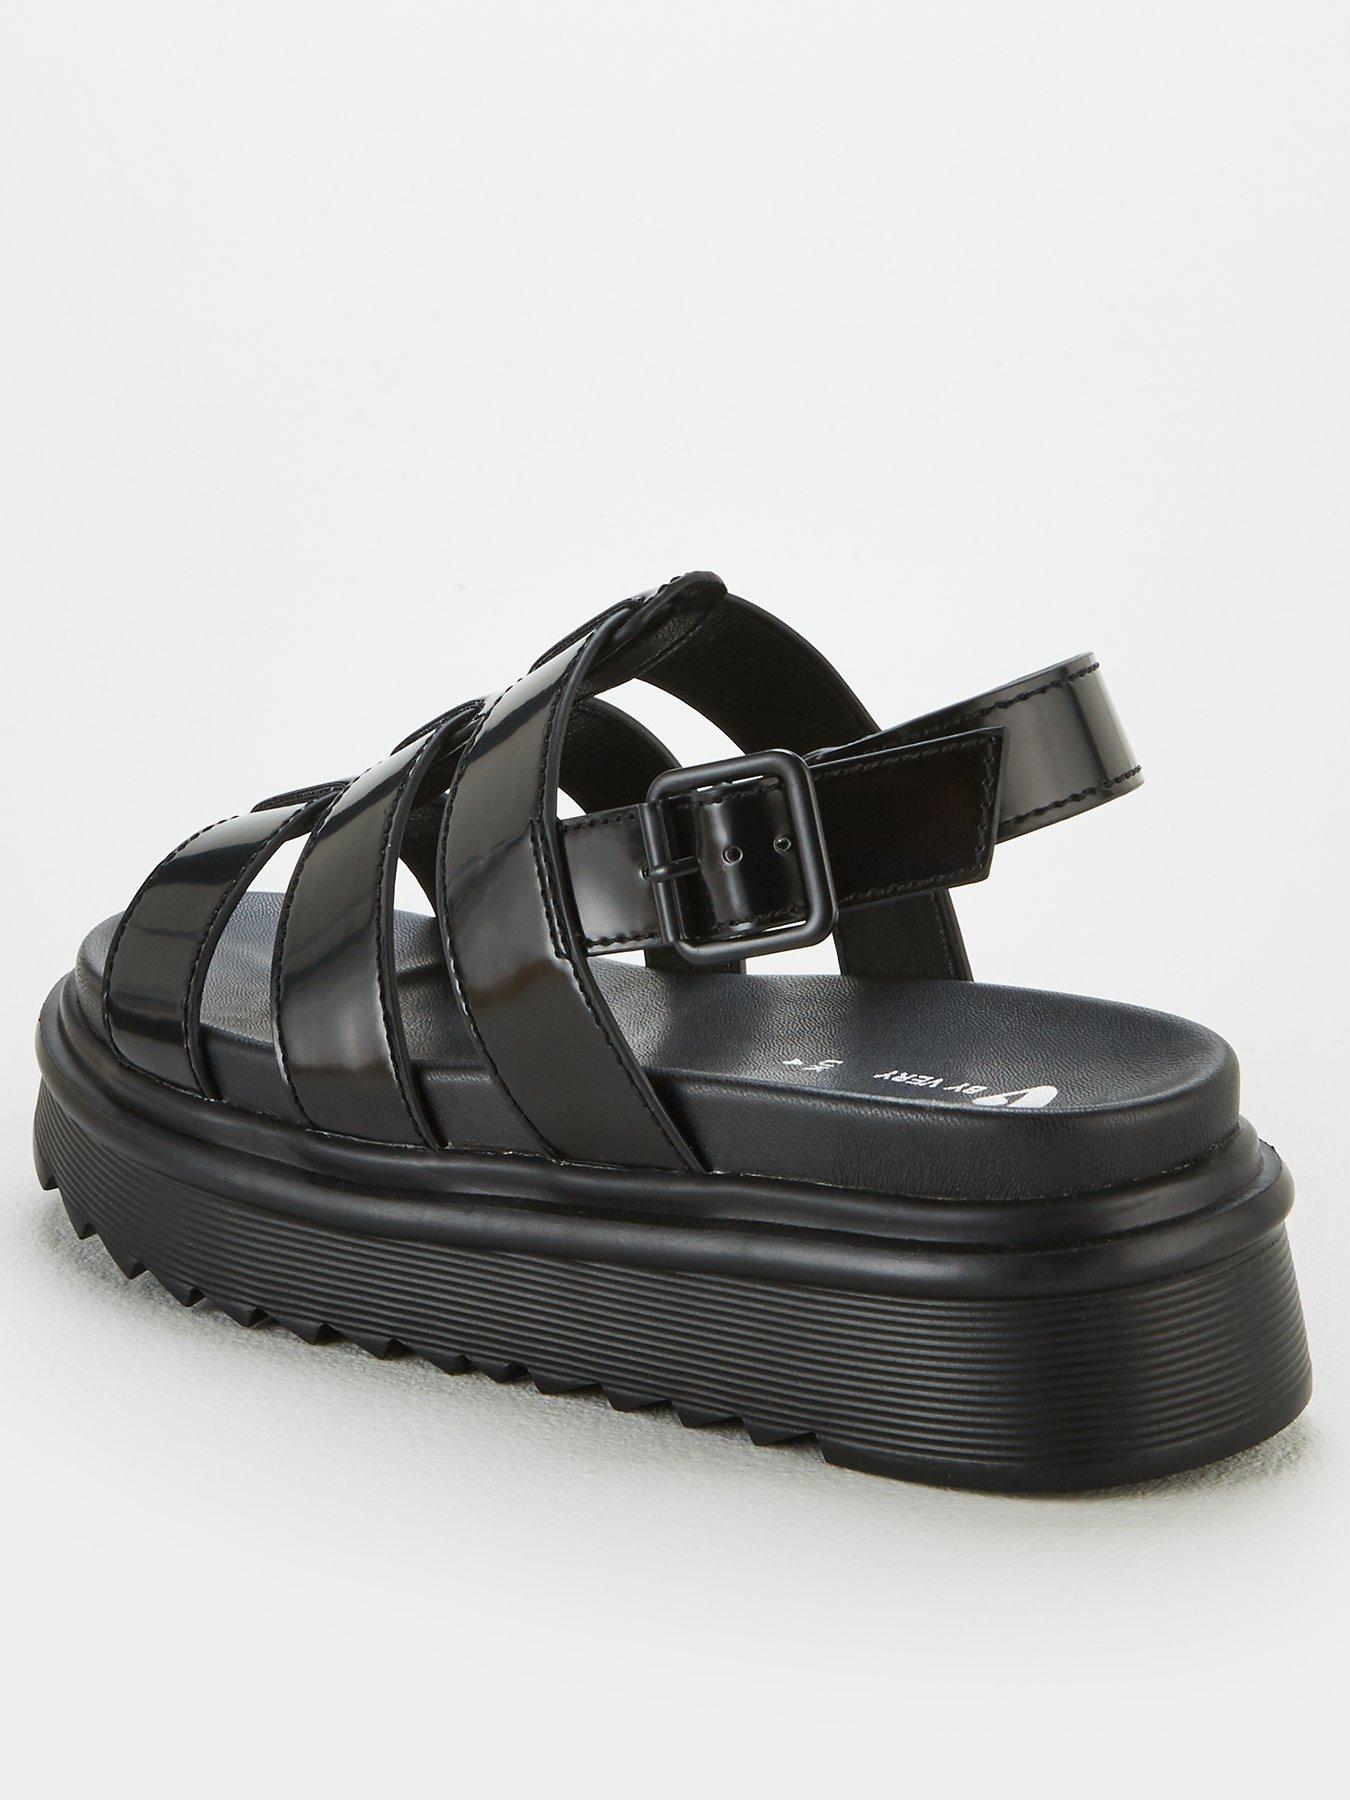 thick sole sandals uk